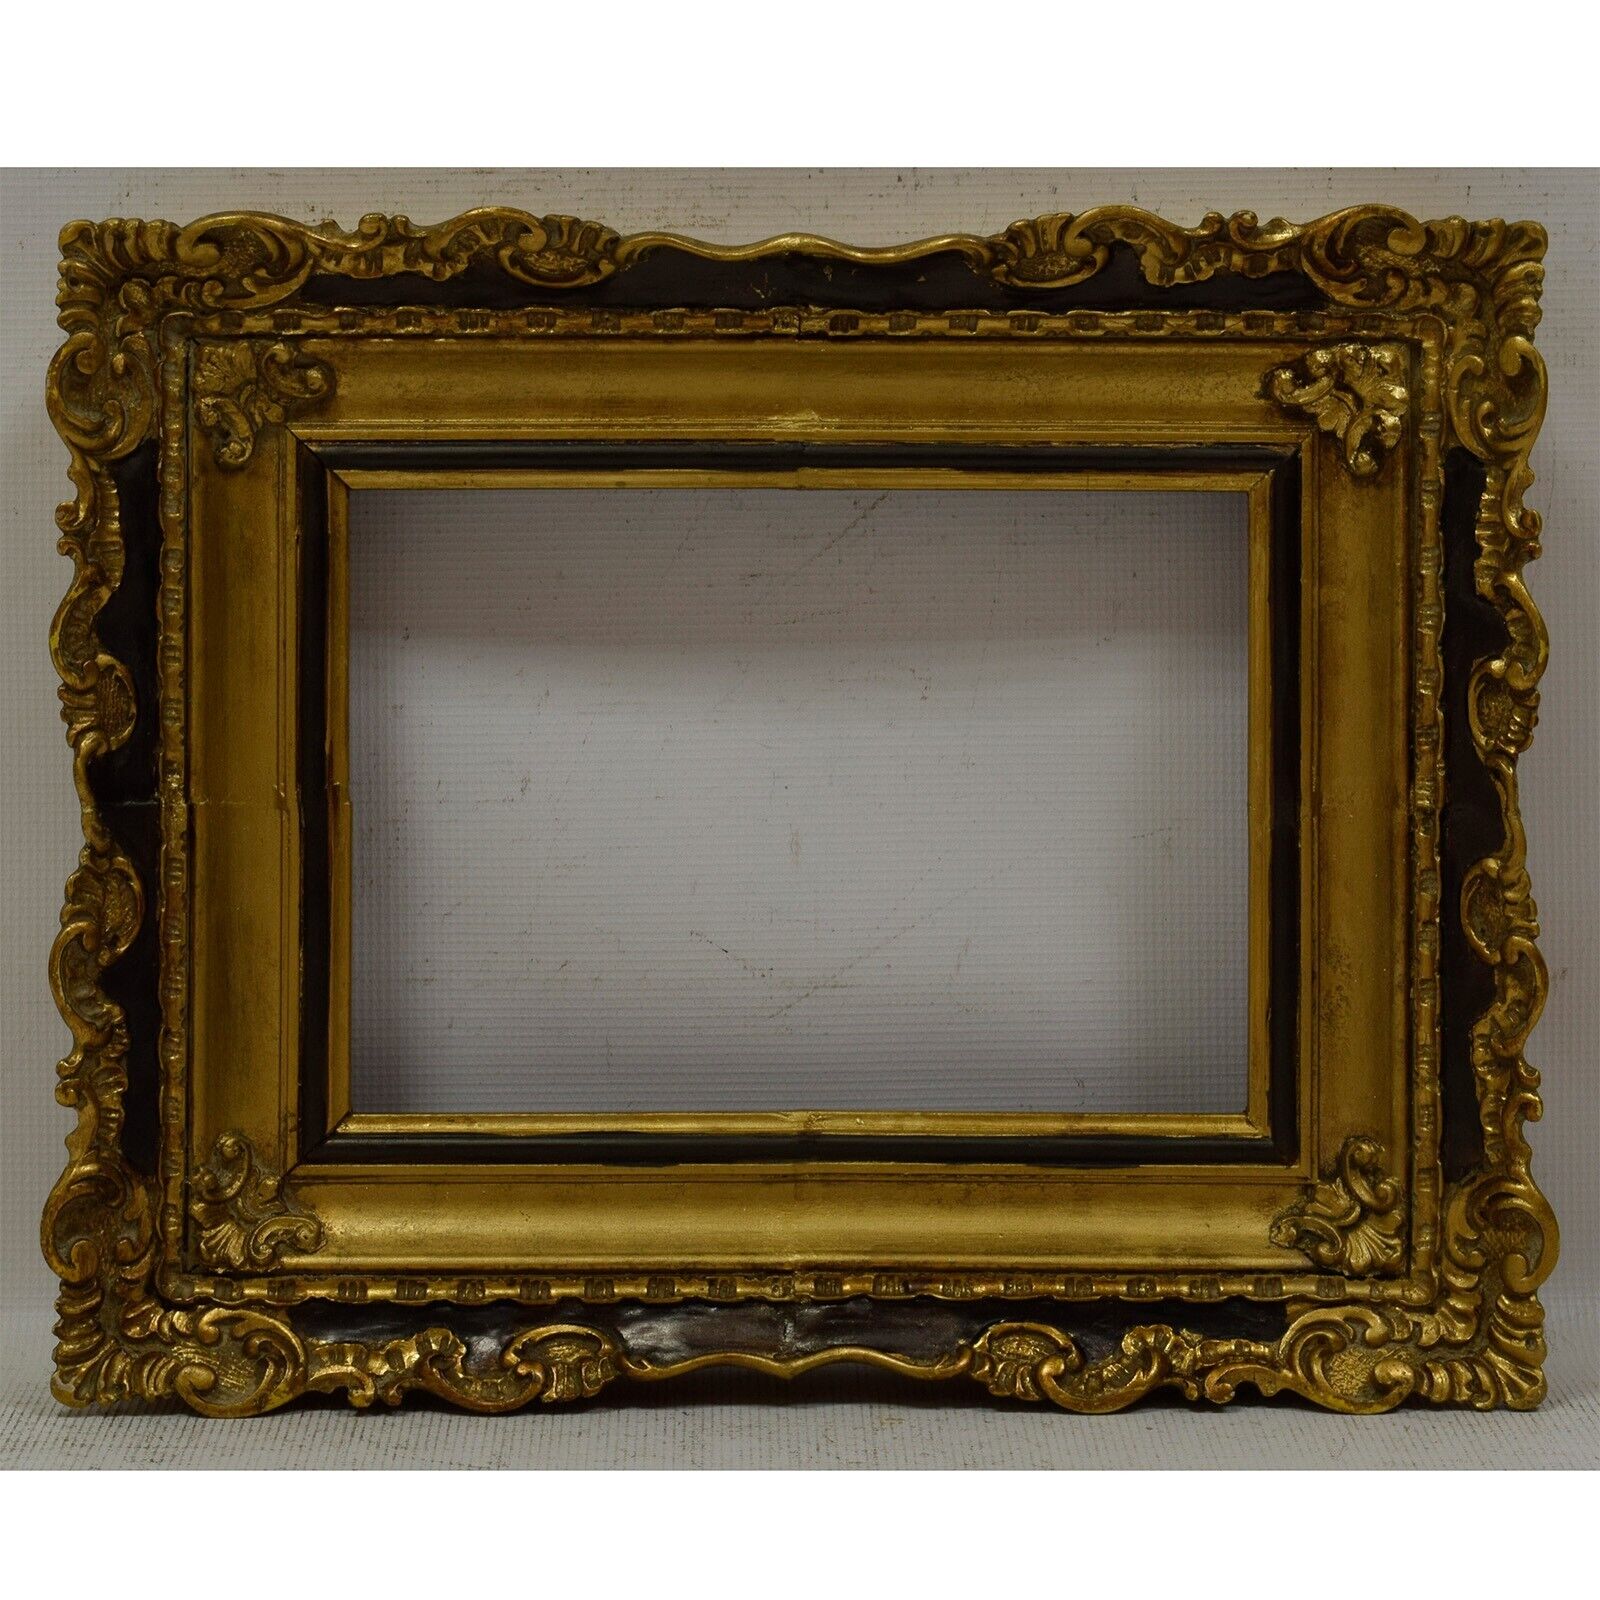 Ca.1920-1950 Old wooden decorative frame original condition Internal:11.4x8.3 in